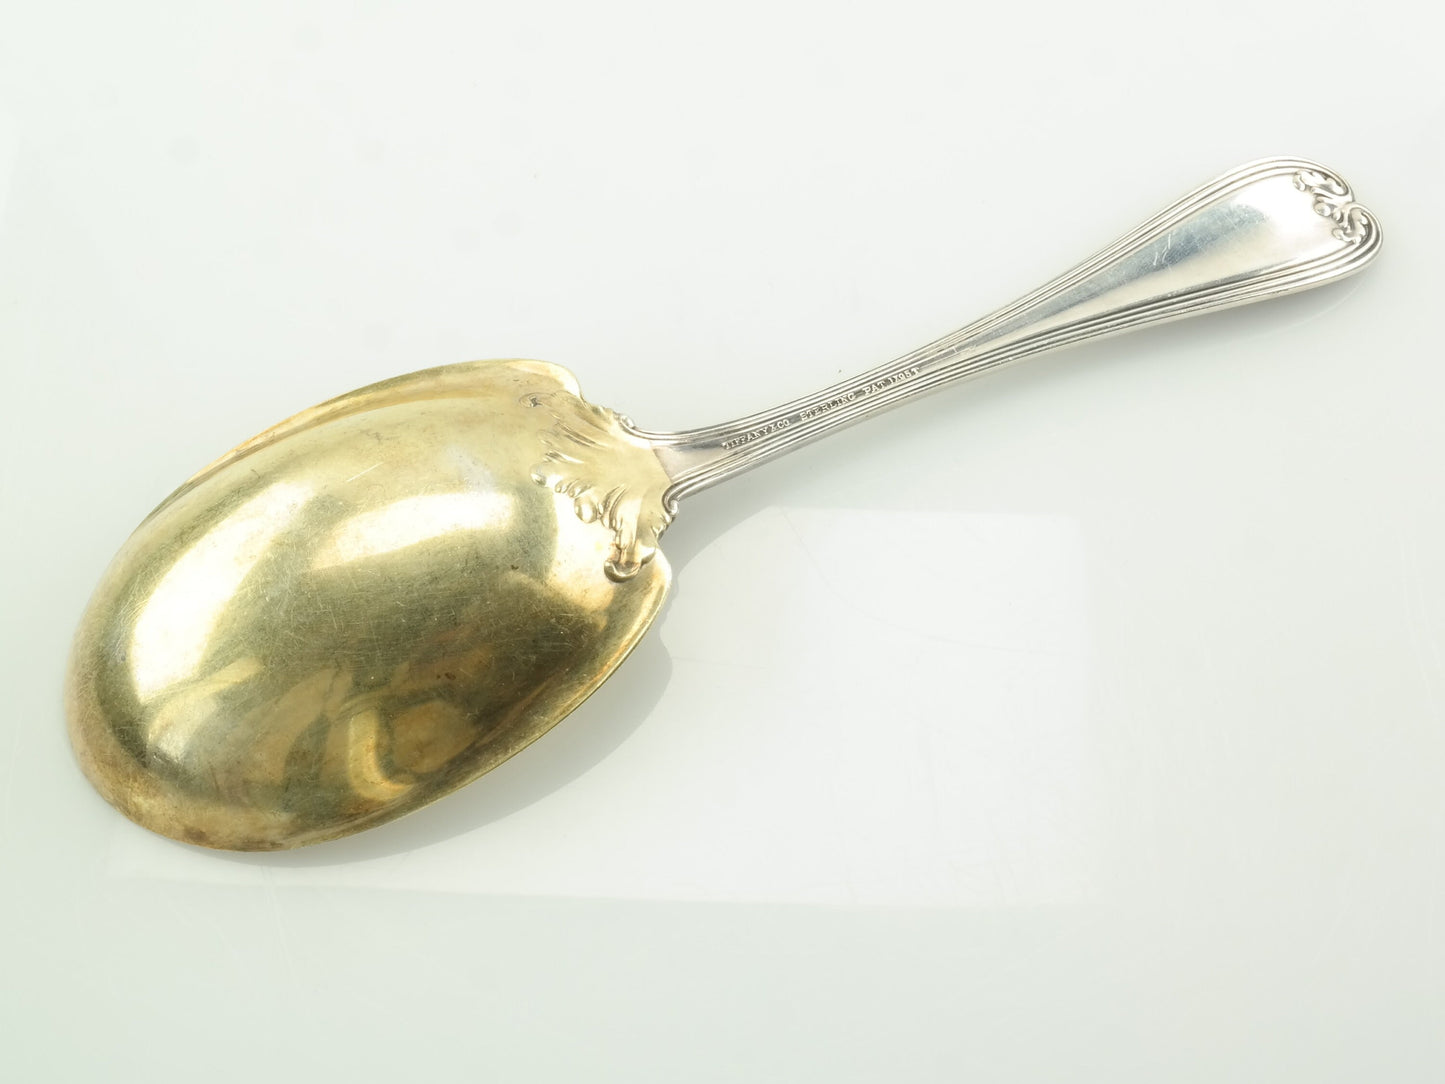 Vintage Sterling Silver Monogrammed Tiffany & Co Serving Colonial Spoon